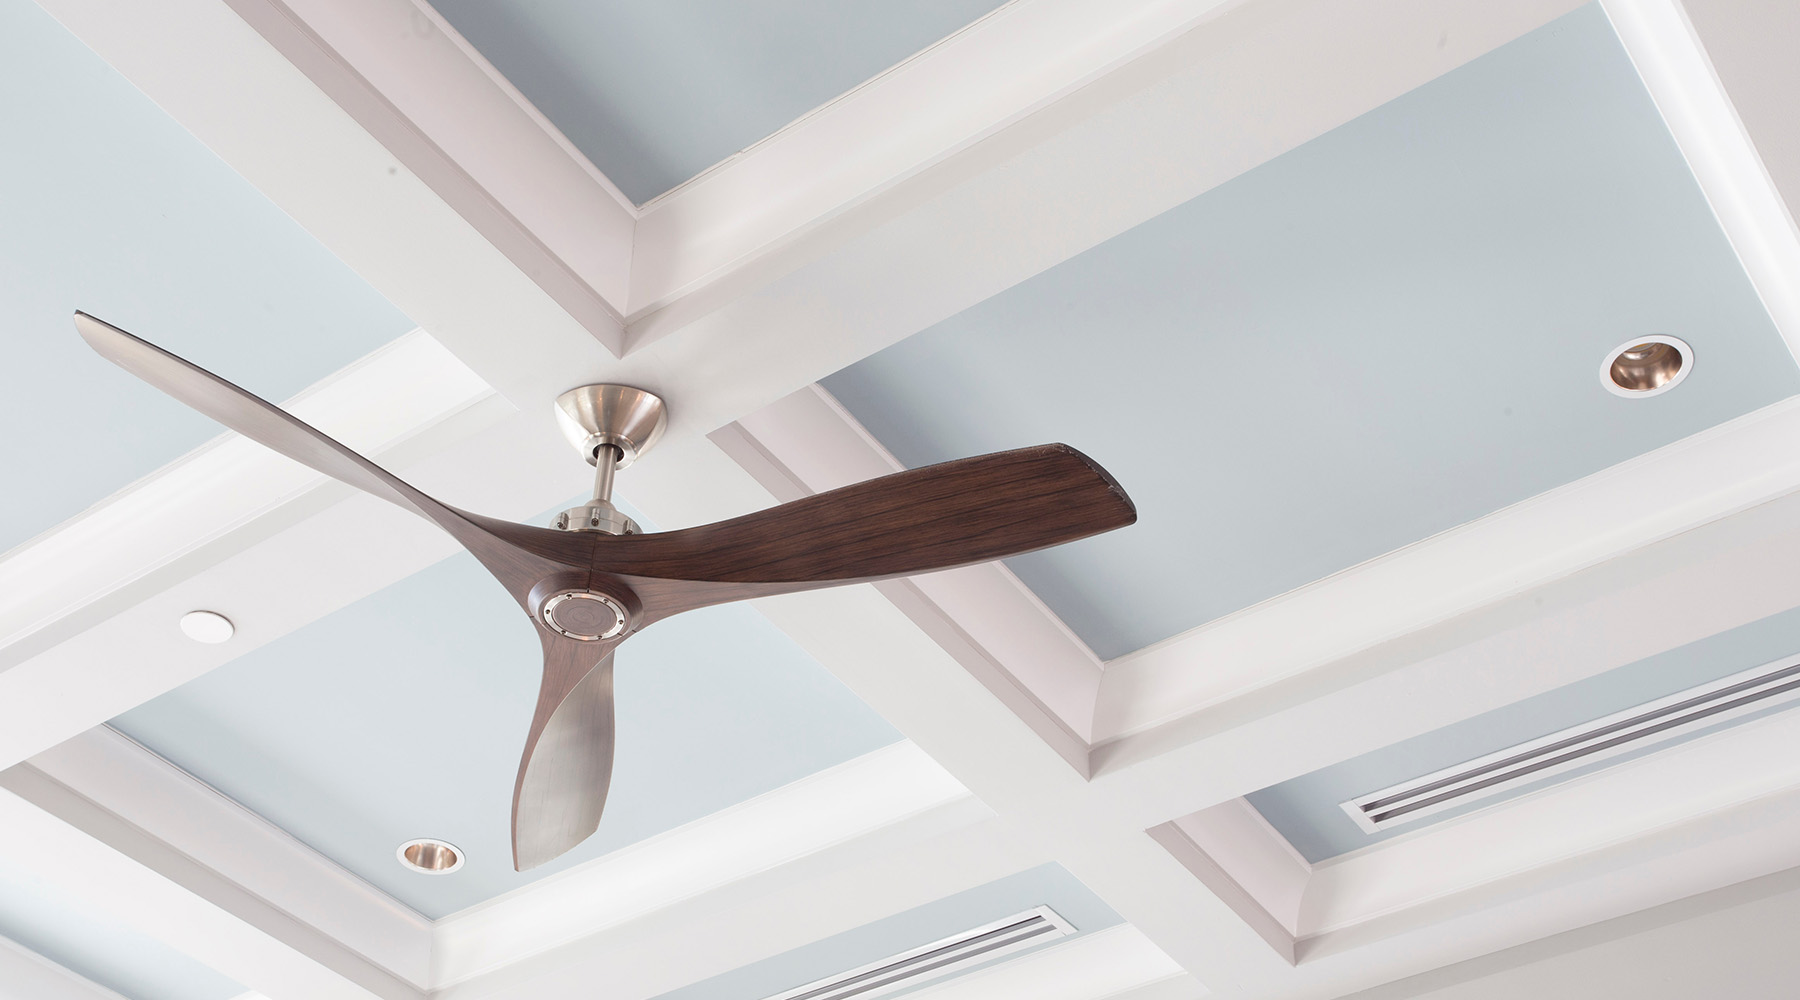 Elegant coffered ceiling adorned with geometric patterns, featuring a modern ceiling fan as a stylish and functional centerpiece